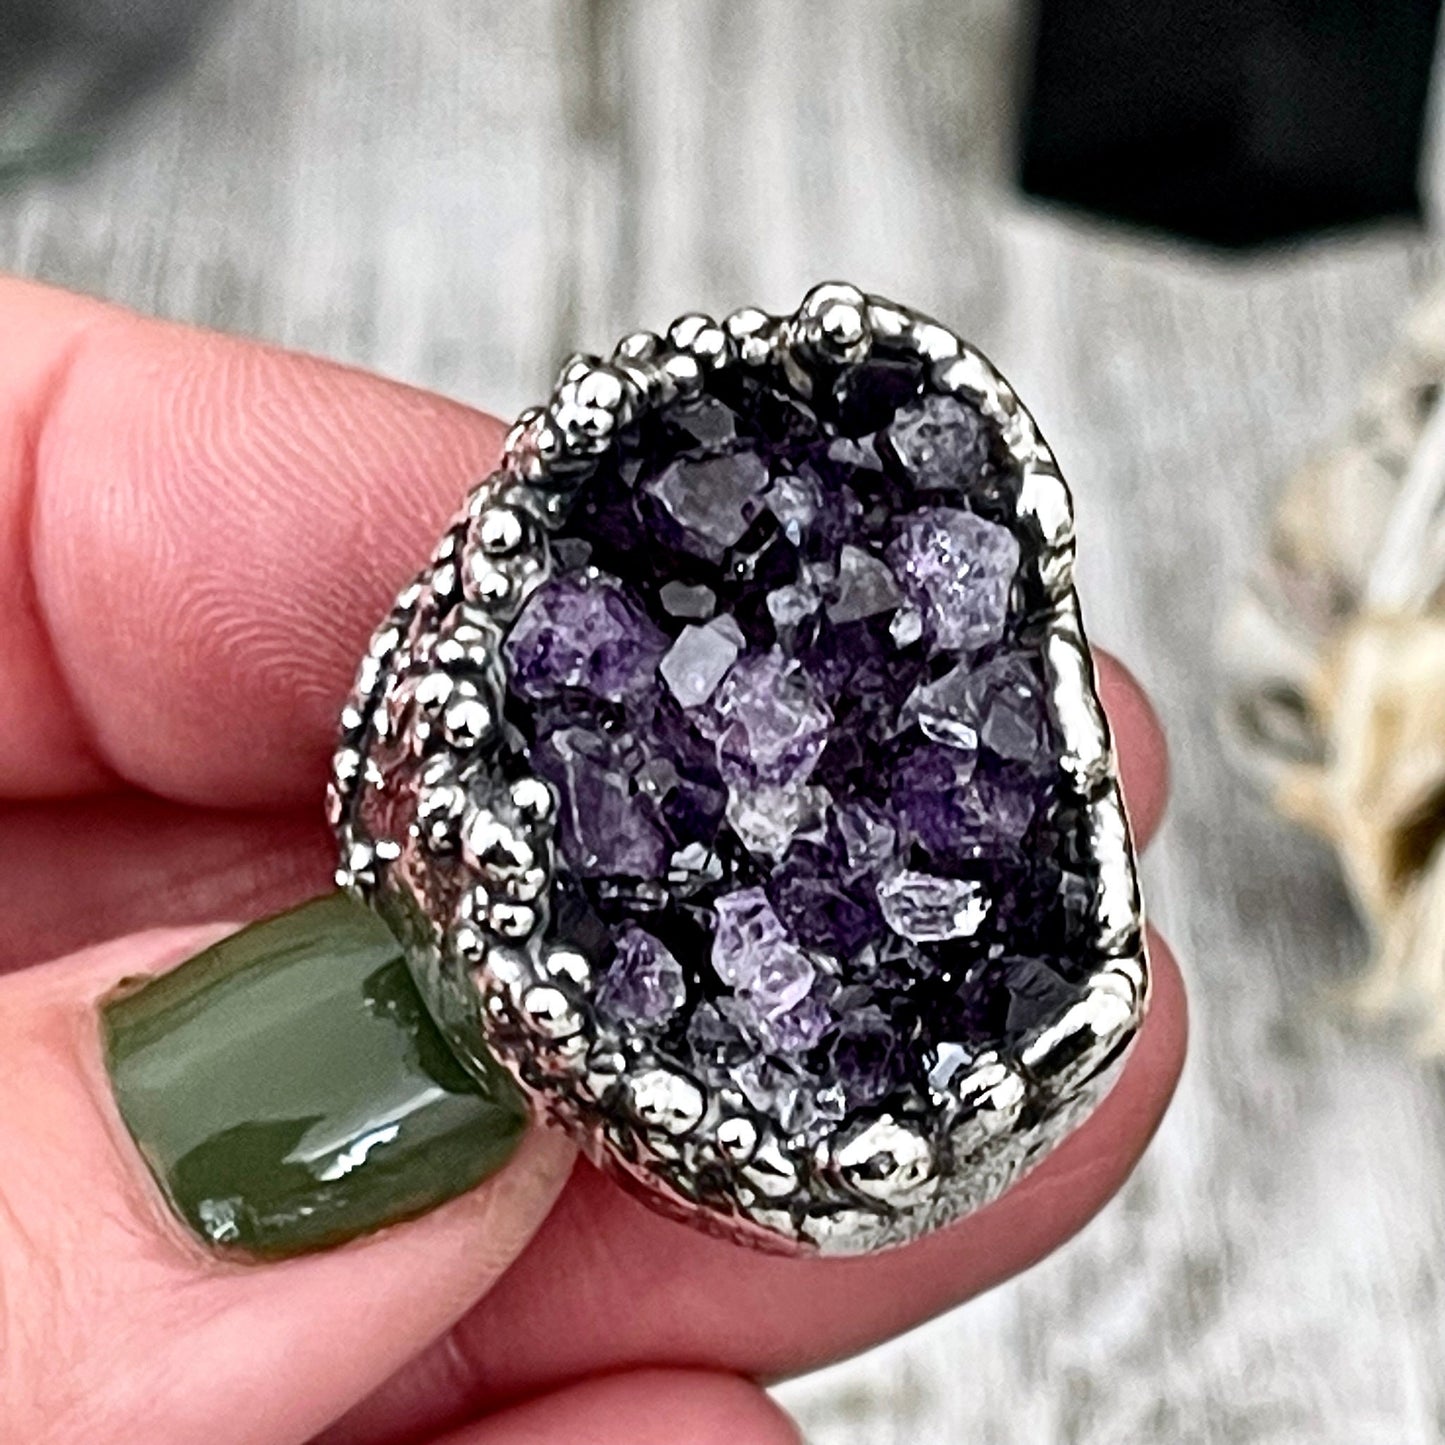 Size 6 Big Raw Amethyst Purple Crystal Ring in Fine Silver / Foxlark Collection - One of a Kind / Big Crystal Ring Witchy Jewelry Gemstone